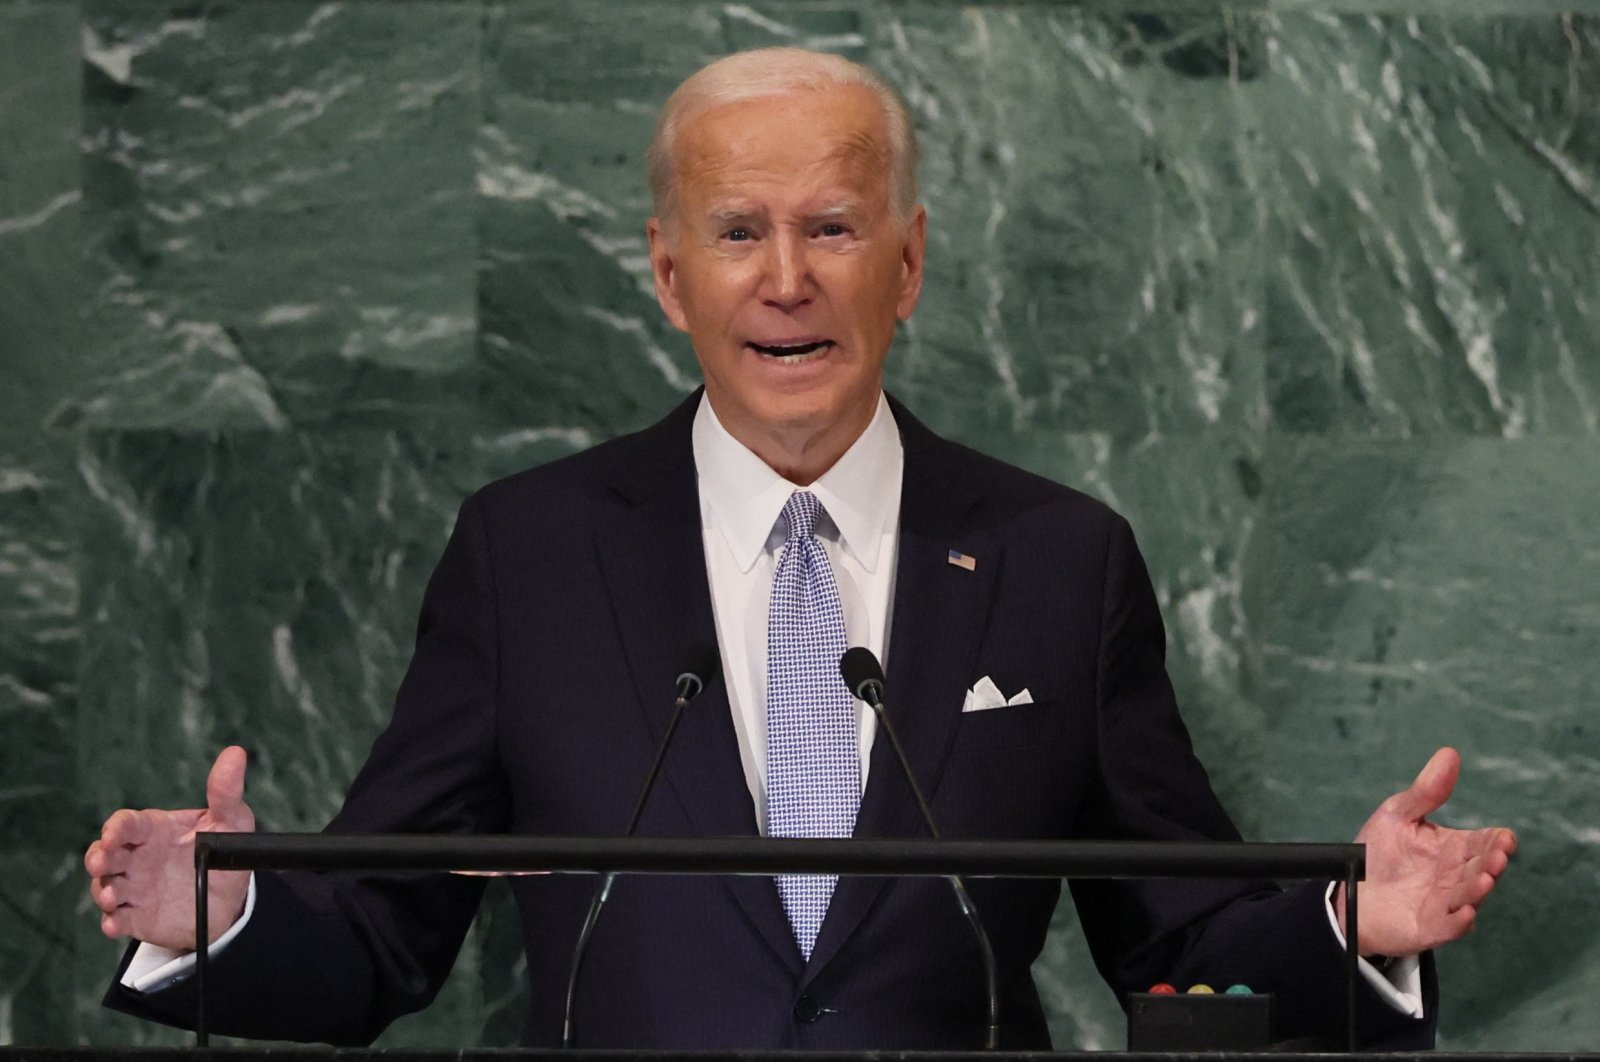 U.S. President Joe Biden addresses the 77th Session of the United Nations General Assembly at U.N. Headquarters in New York City, U.S., Sept. 21, 2022. (Reuters Photo)